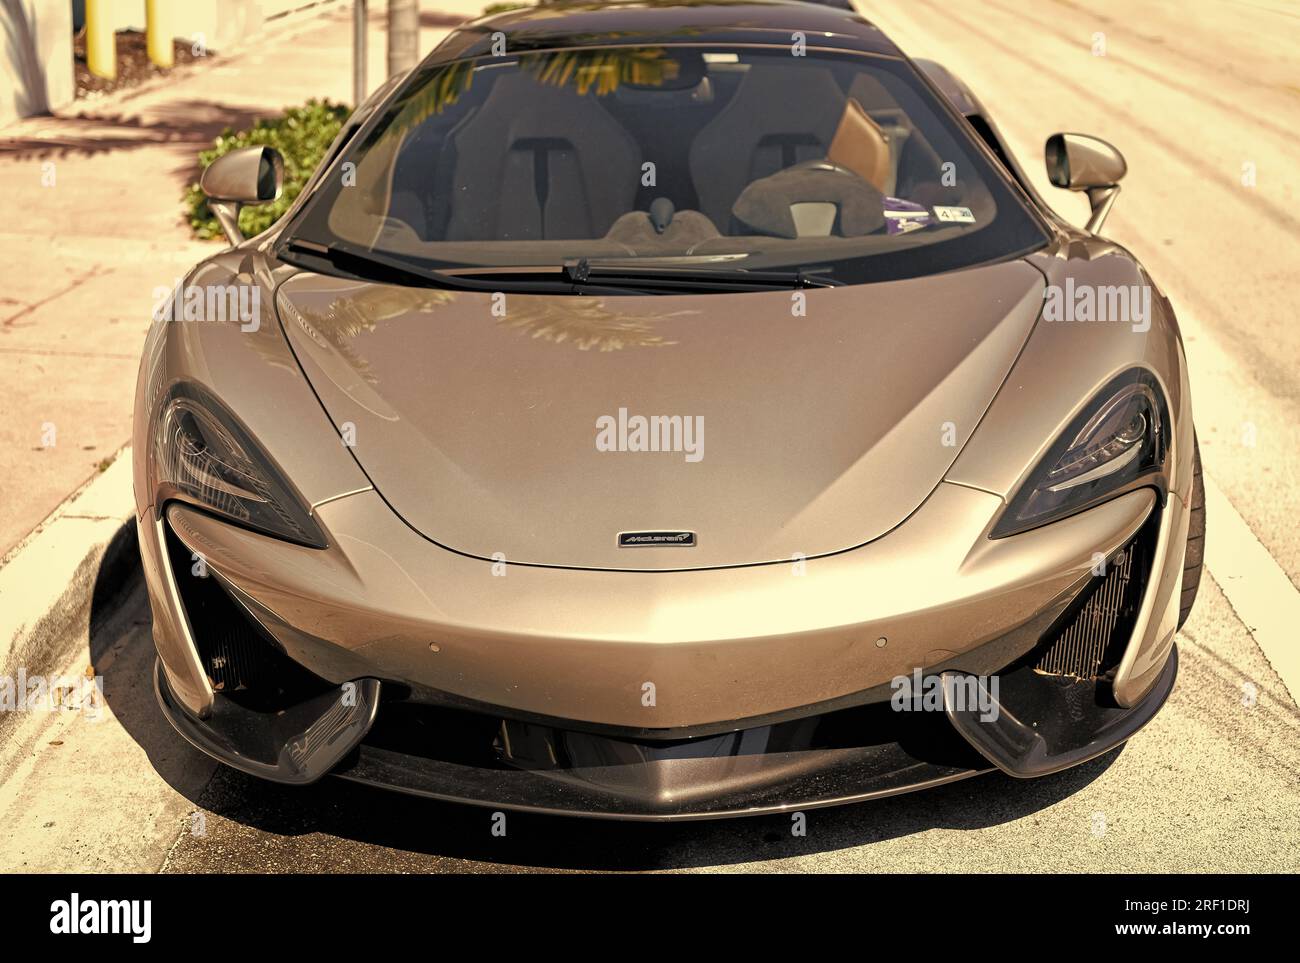 Los Angeles, California USA - April 13, 2021: silver grey McLaren Automotive Limited 570s luxury sport car supercar parked in LA the U.S. state of Cal Stock Photo